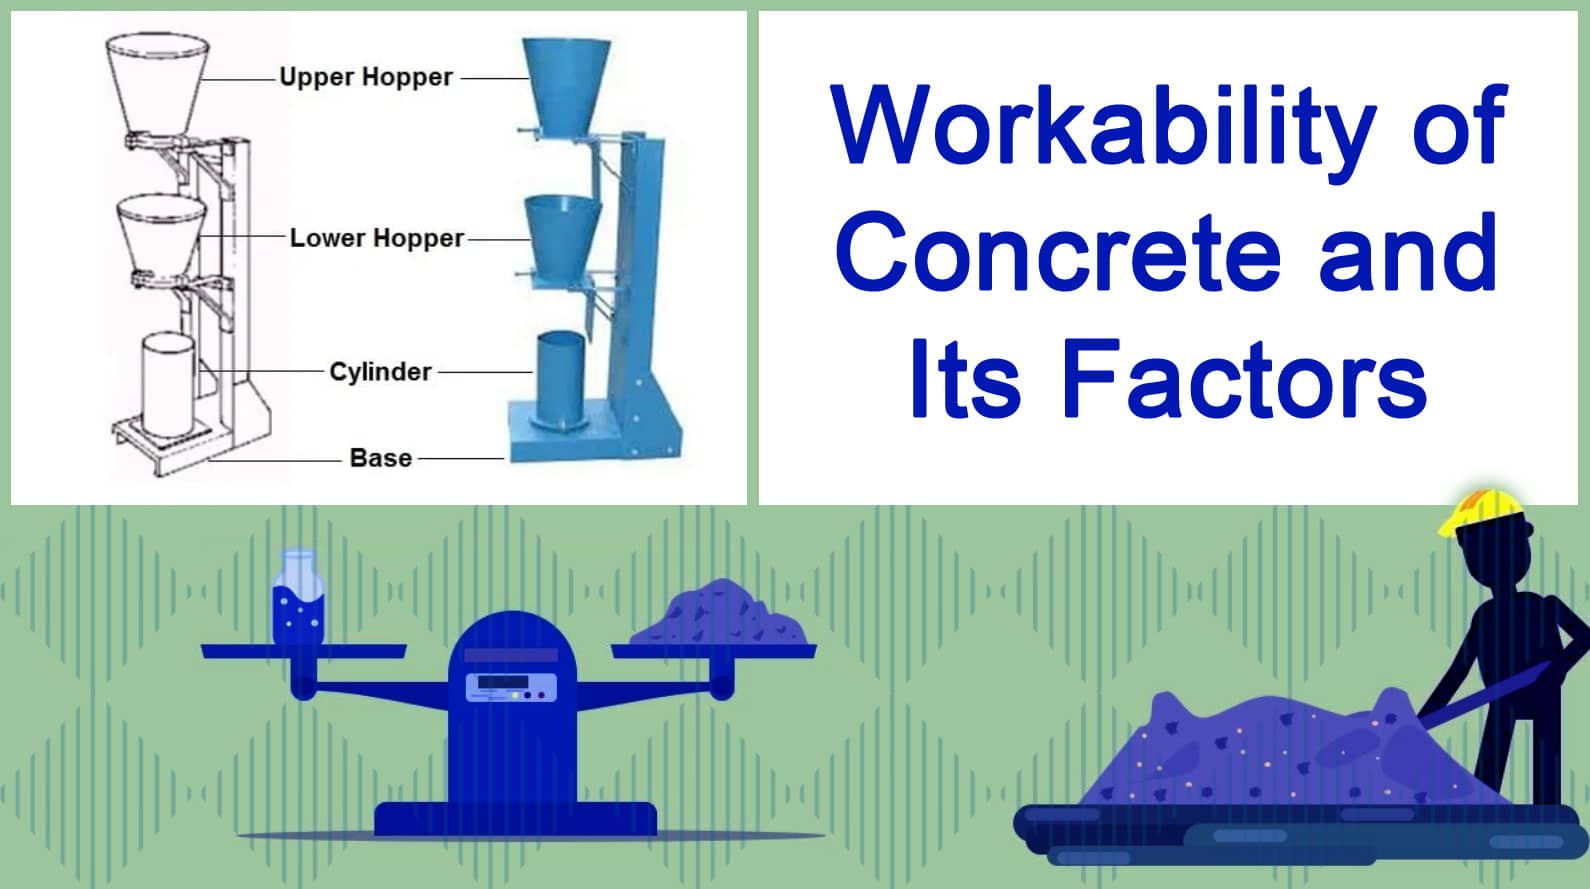 Workability of Concrete and Its Factors